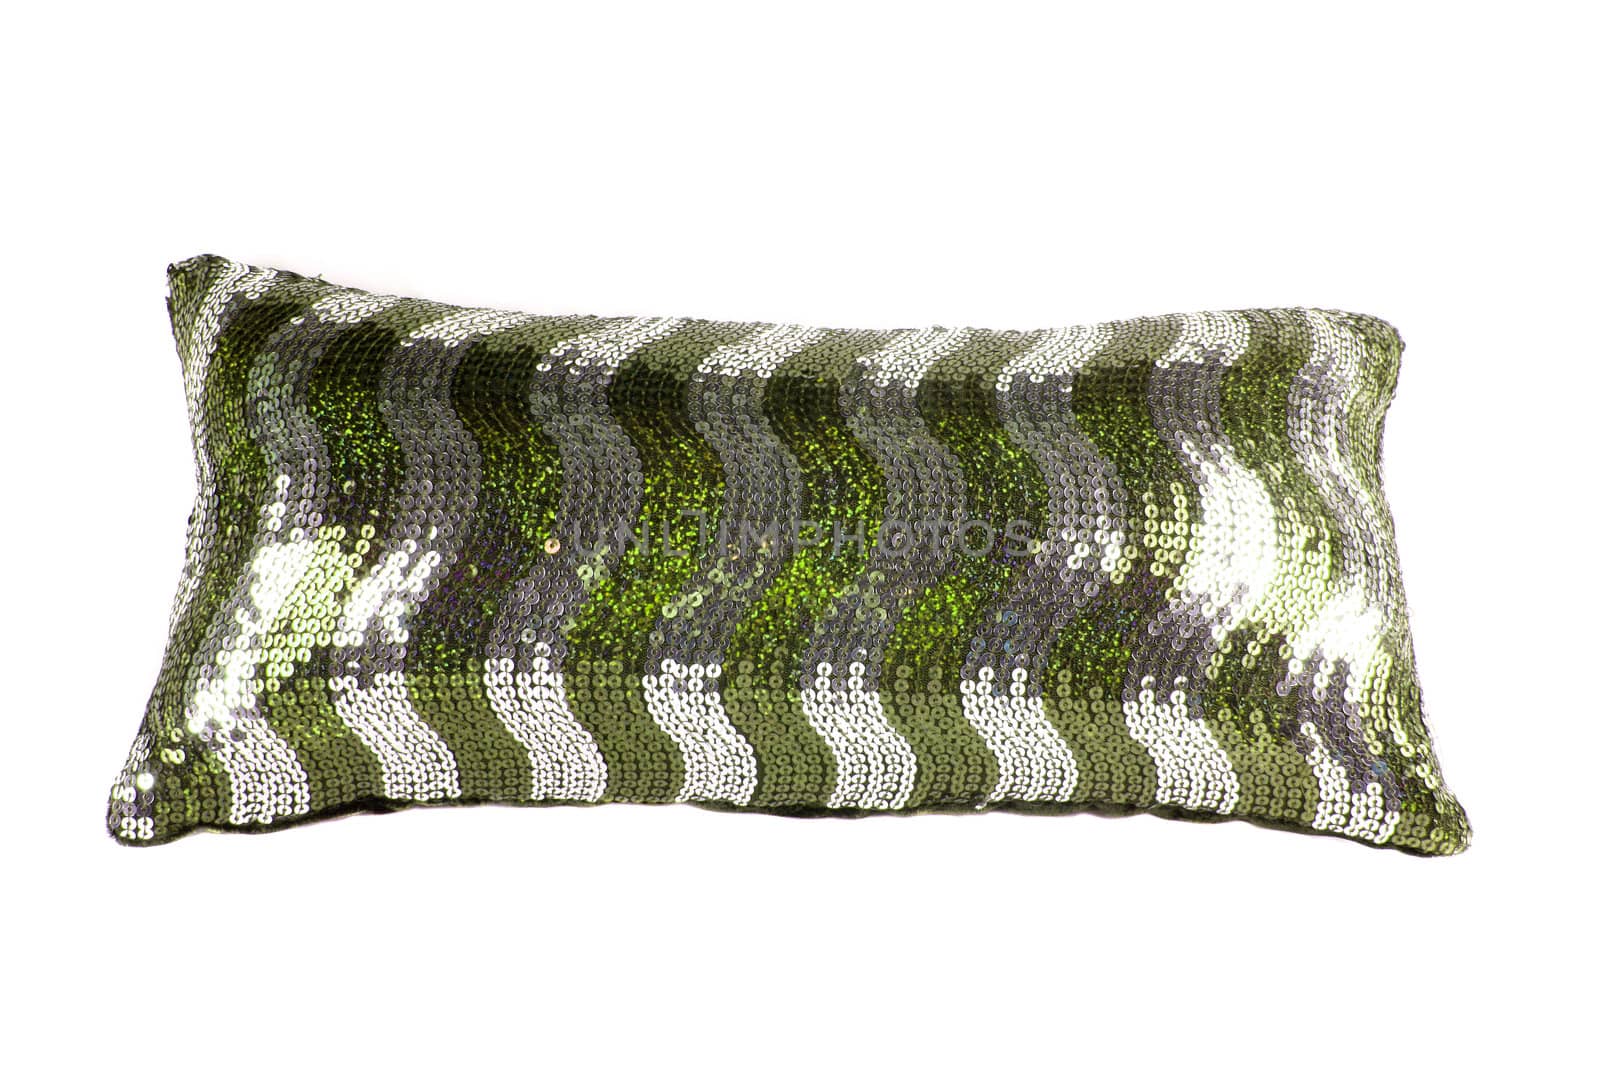 A designer pillow with a wavy design of green and white sequins, isolated on white studio background.